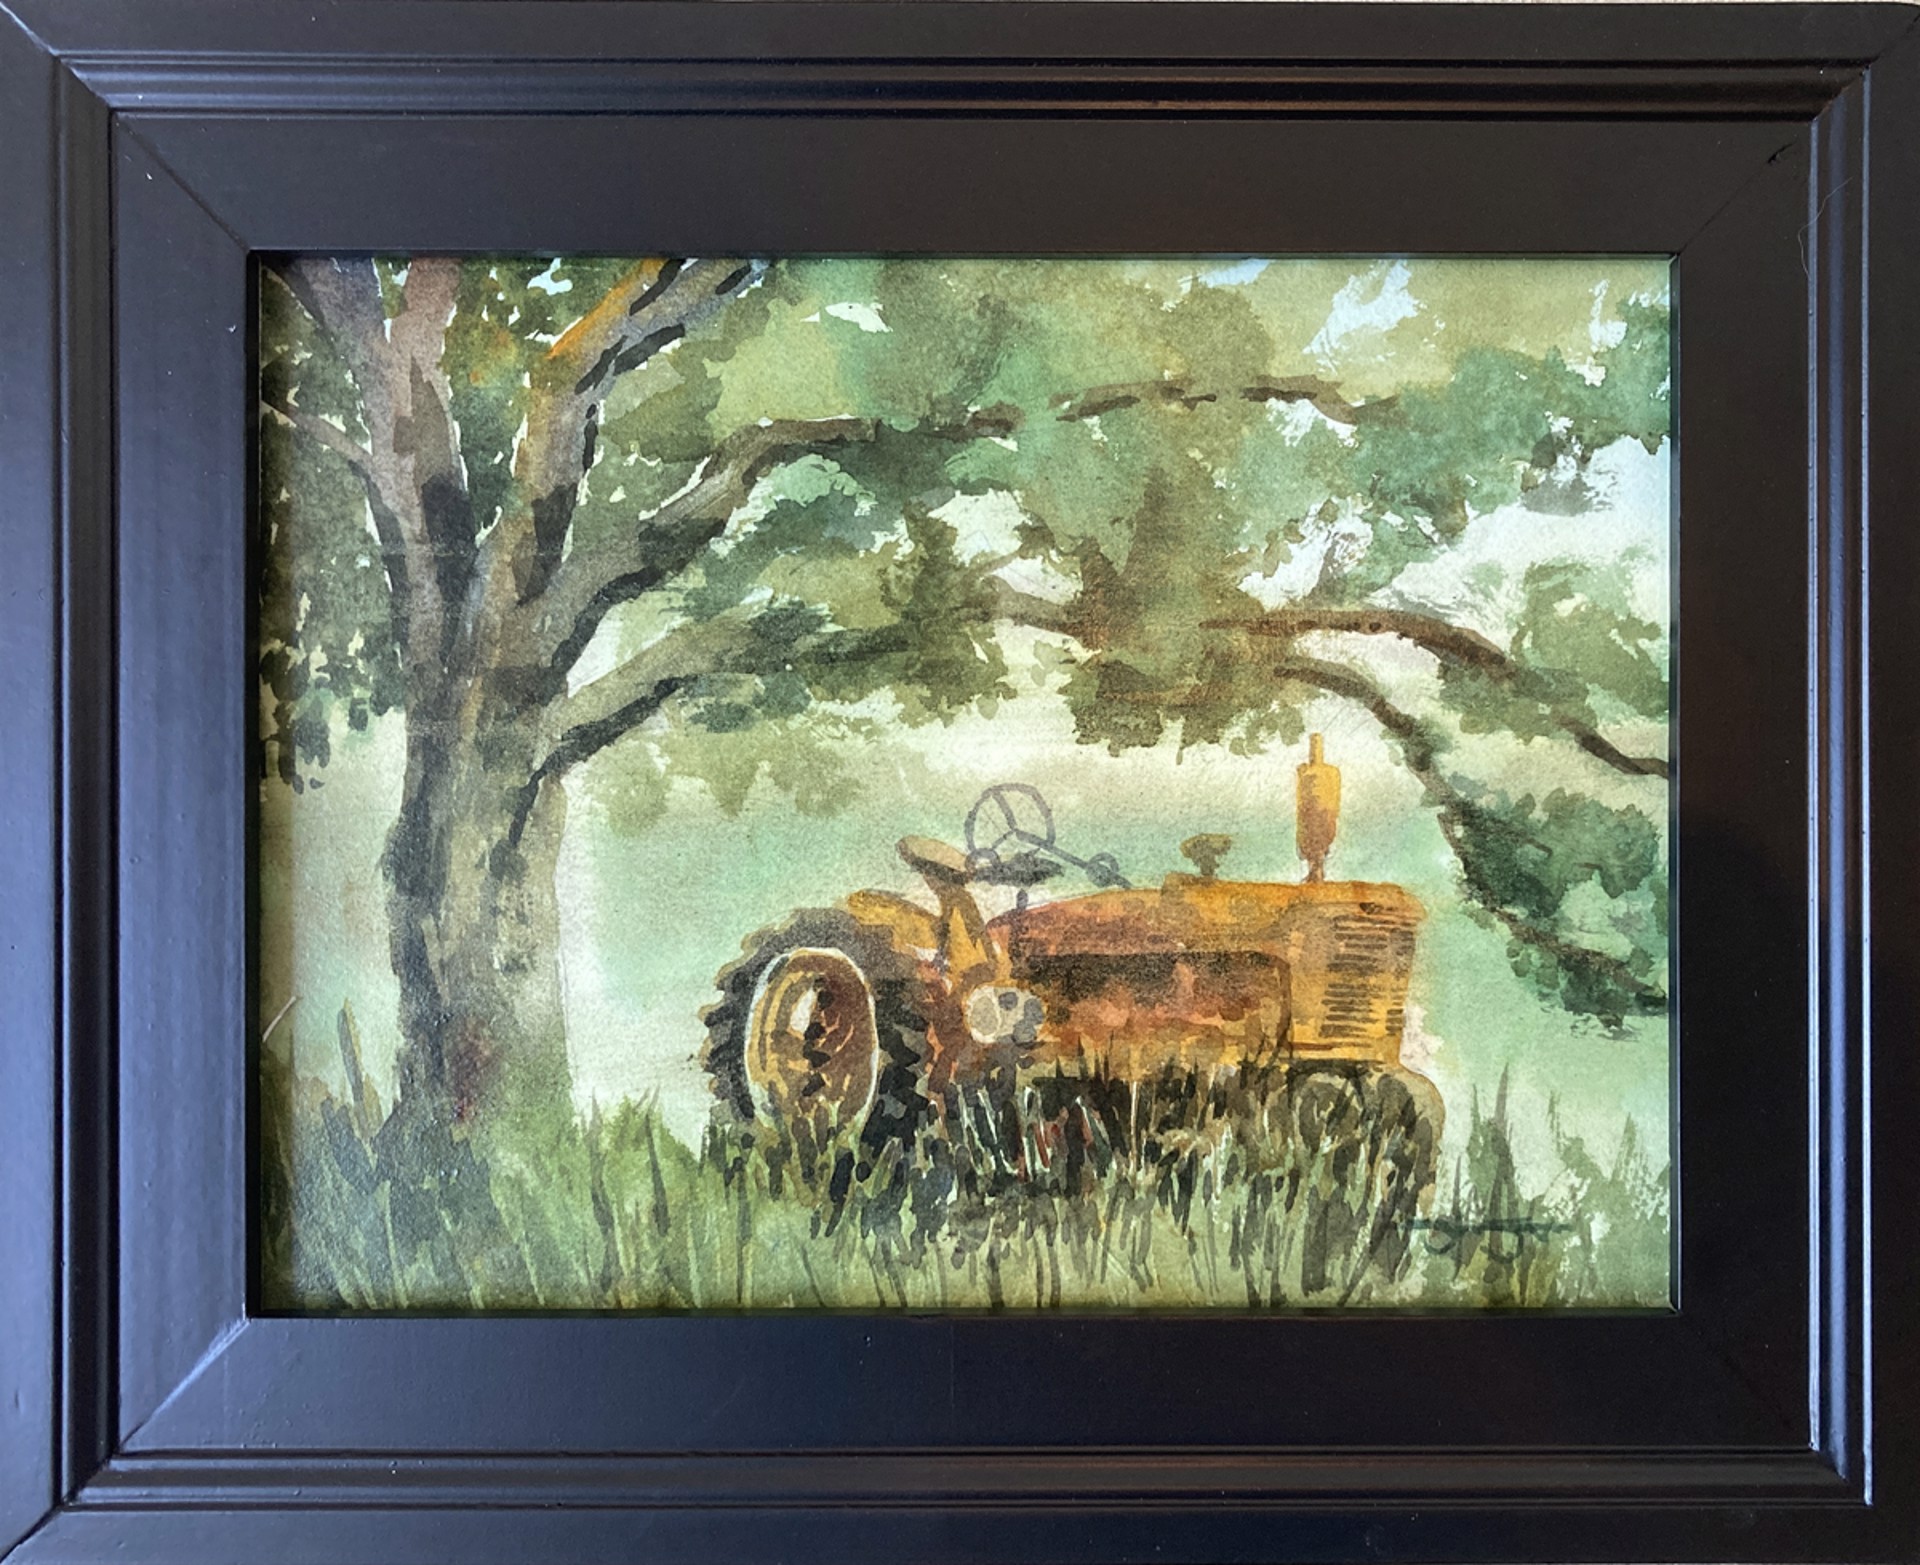 Betty's Tractor by Jim Street